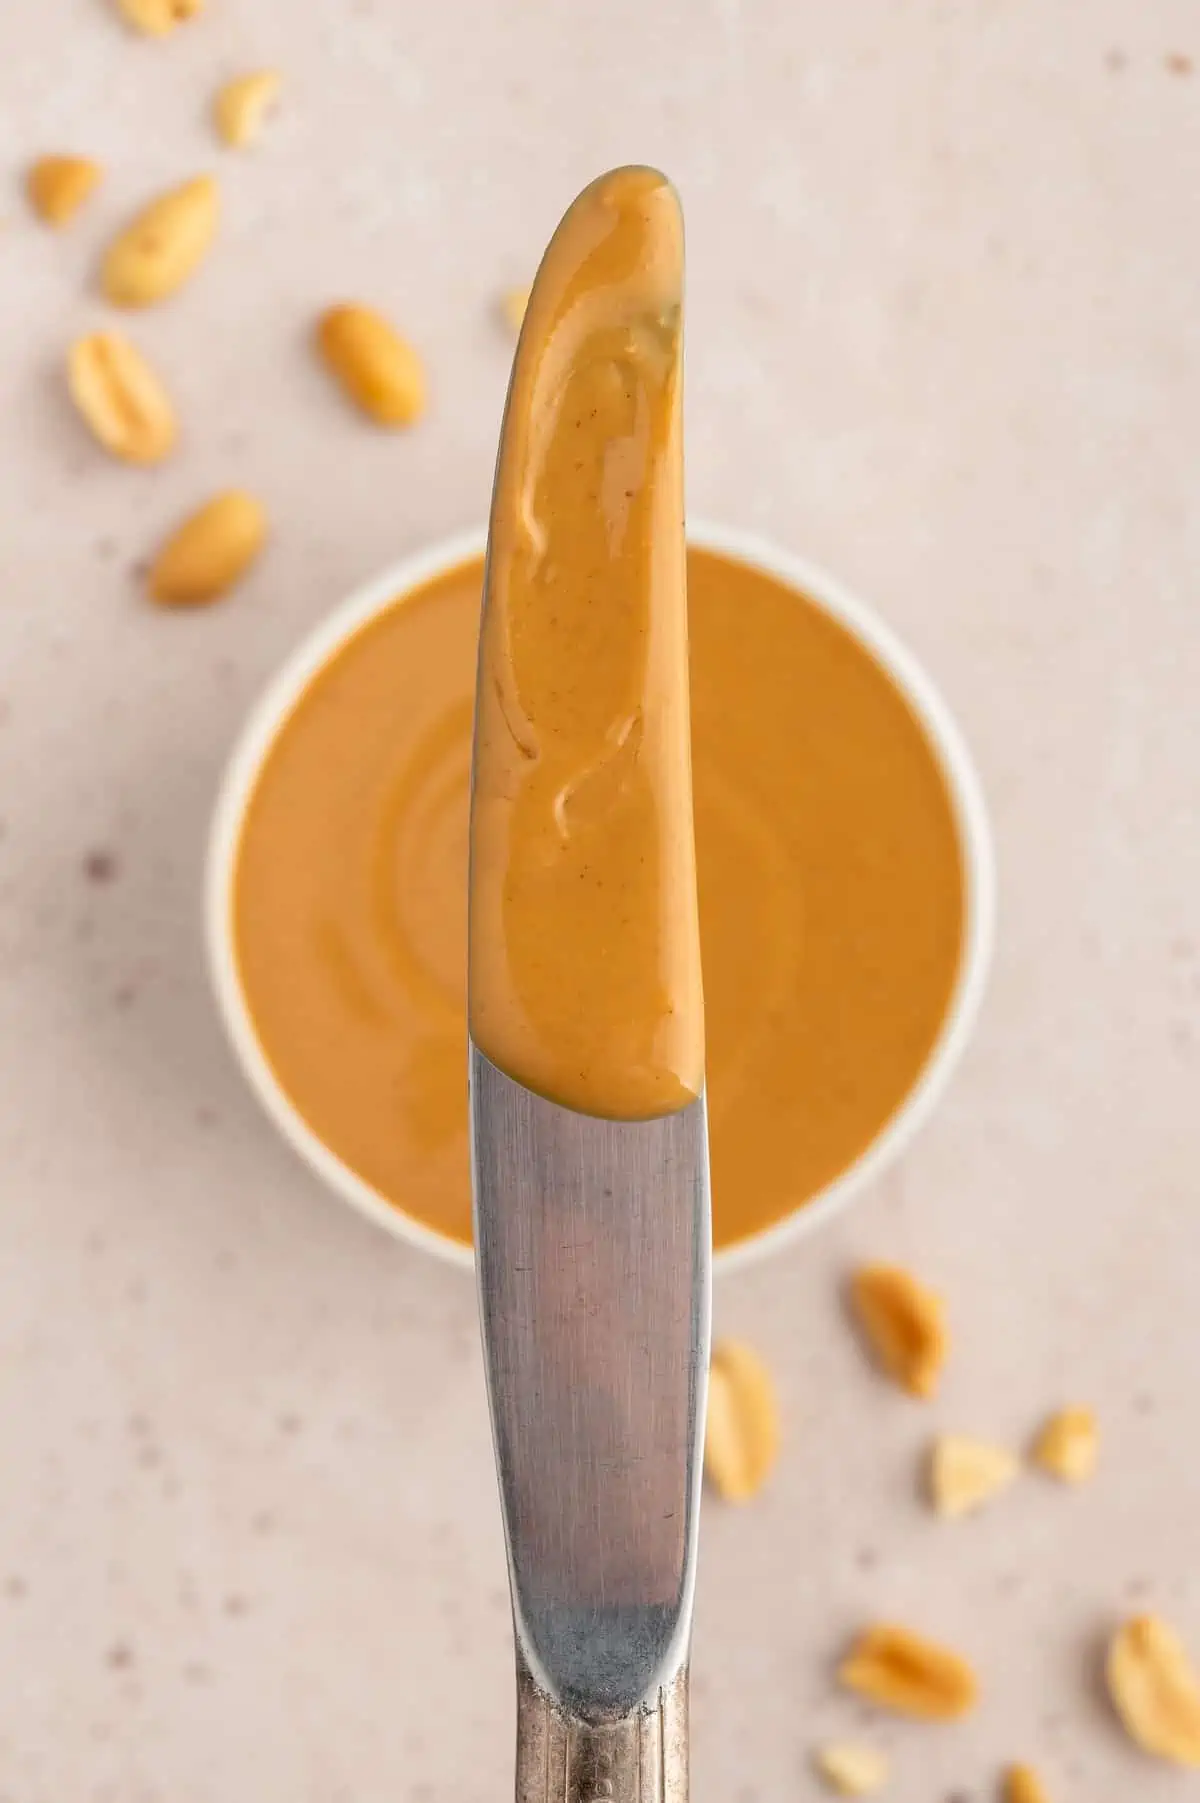 Smooth creamy peanut butter on a bread knife over a bowl of vegan peanut butter.